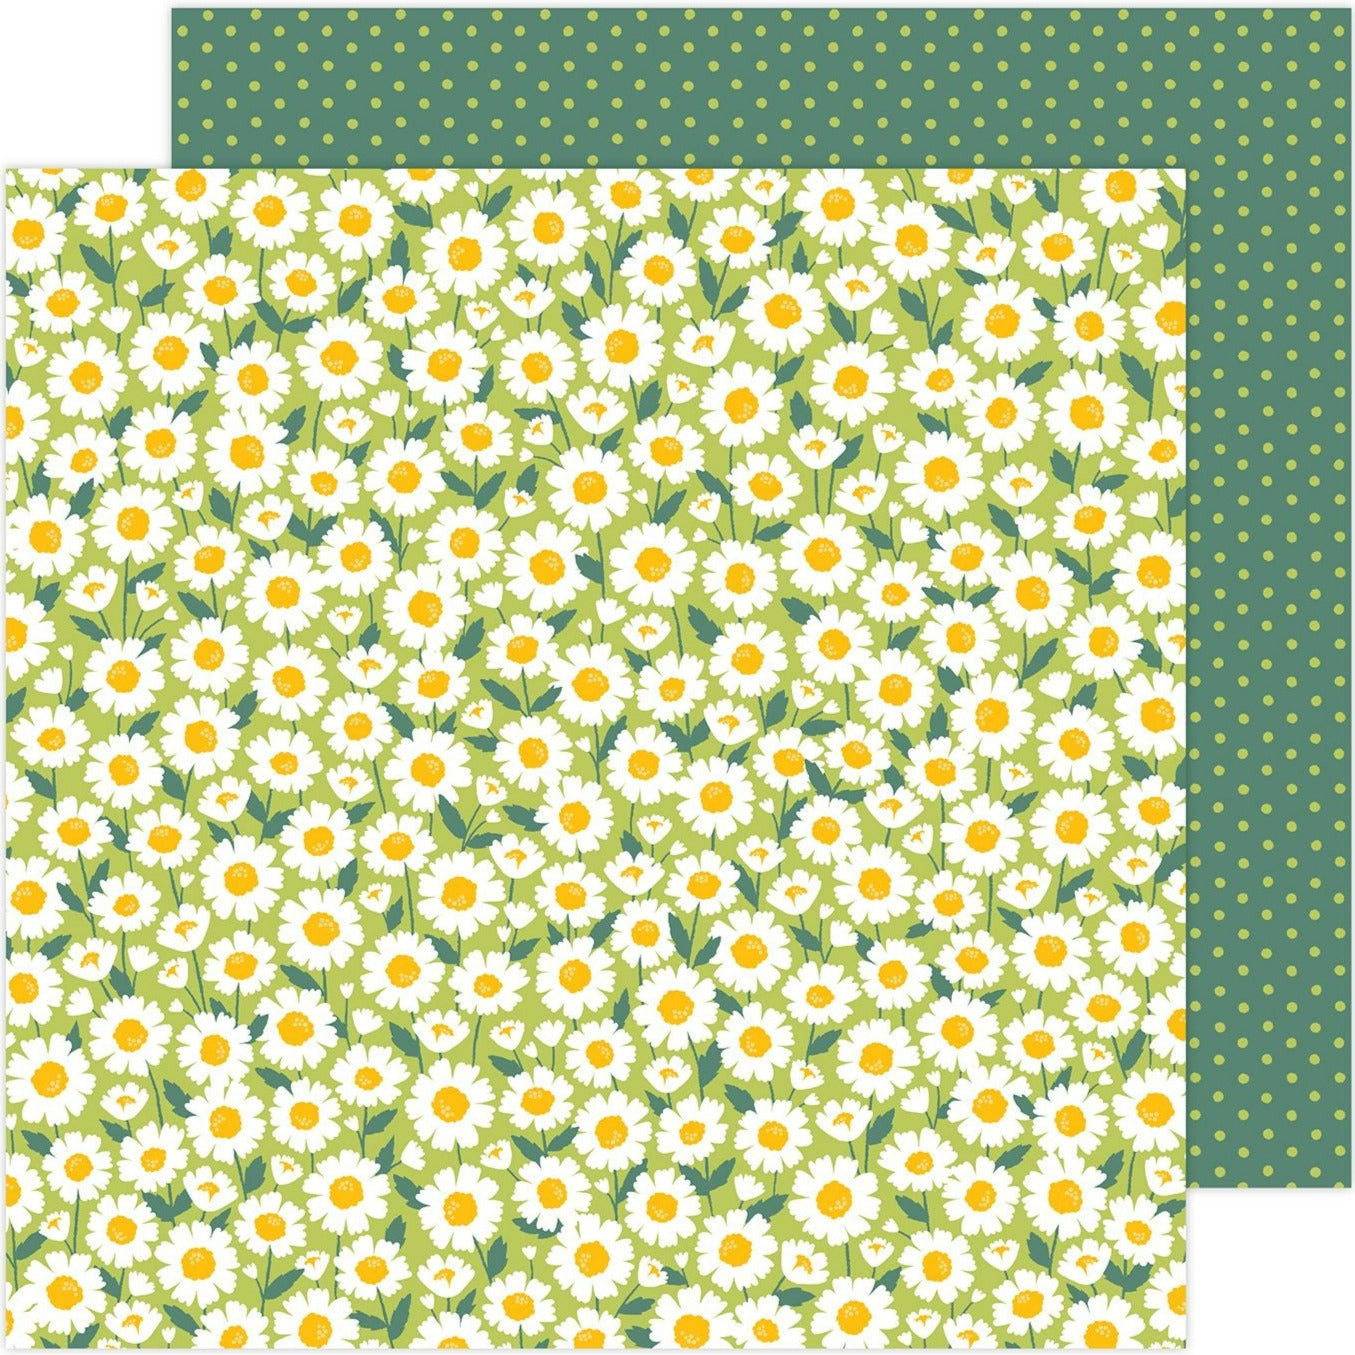 (Side A - white flowers, dark green leaves, and stems on a moss green background, Side B - lime green polka-dots on a forest green background)